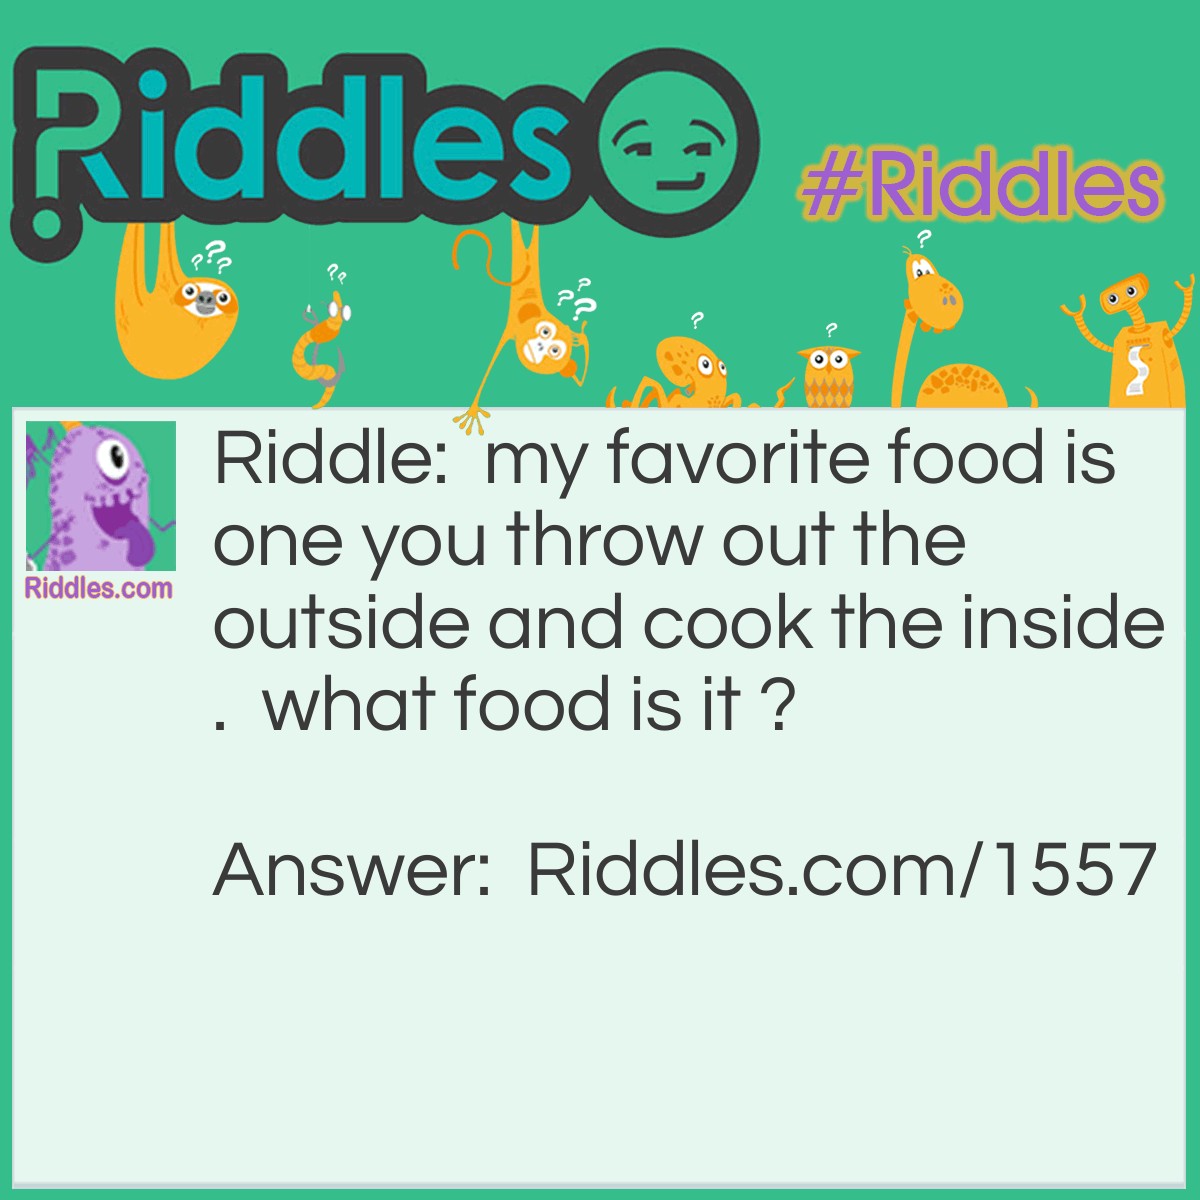 Riddle: My favorite food is one you throw out the outside and cook the inside. What food is it ? Answer: Corn on the cob. You throw out the cob.